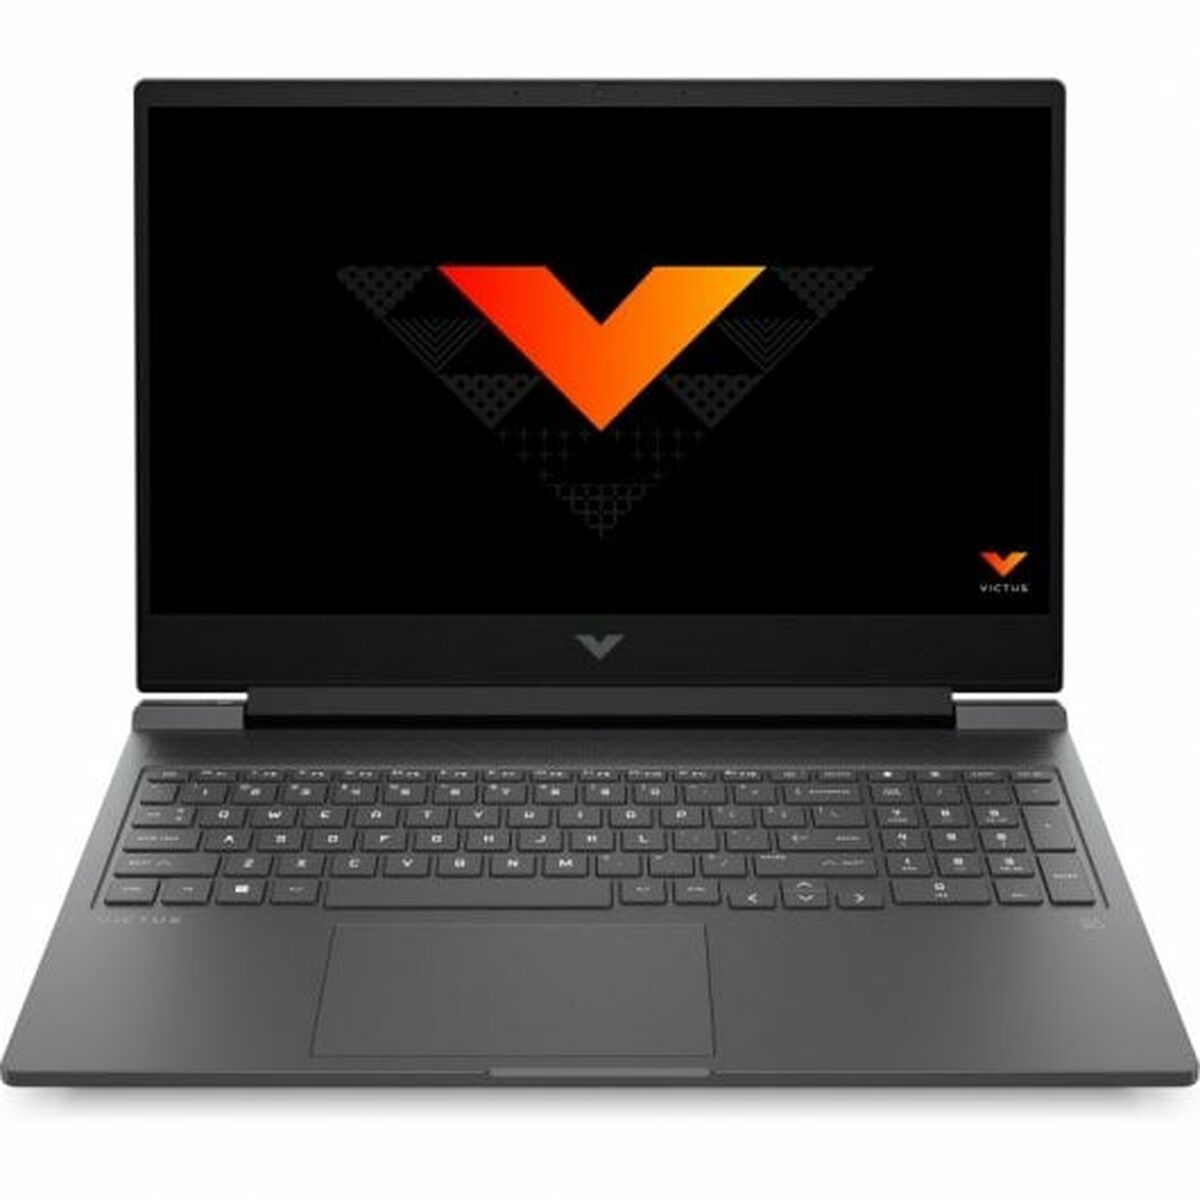 Laptop HP Victus Gaming Laptop 16-r0016ns 16,1" Intel Core i7-13700H 16 GB RAM 1 TB SSD Nvidia Geforce RTX 4060, HP, Computing, notebook-hp-victus-gaming-laptop-16-r0016ns-1-tb-ssd-16-gb-ram-intel-core-i7-13700h, :1 TB, :2-in-1, :Gaming Laptop, :Intel-i7, :QWERTY, :RAM 16 GB, :Touchscreen, Brand_HP, category-reference-2609, category-reference-2791, category-reference-2797, category-reference-t-19685, Condition_NEW, office, Price_+ 1000, Teleworking, RiotNook